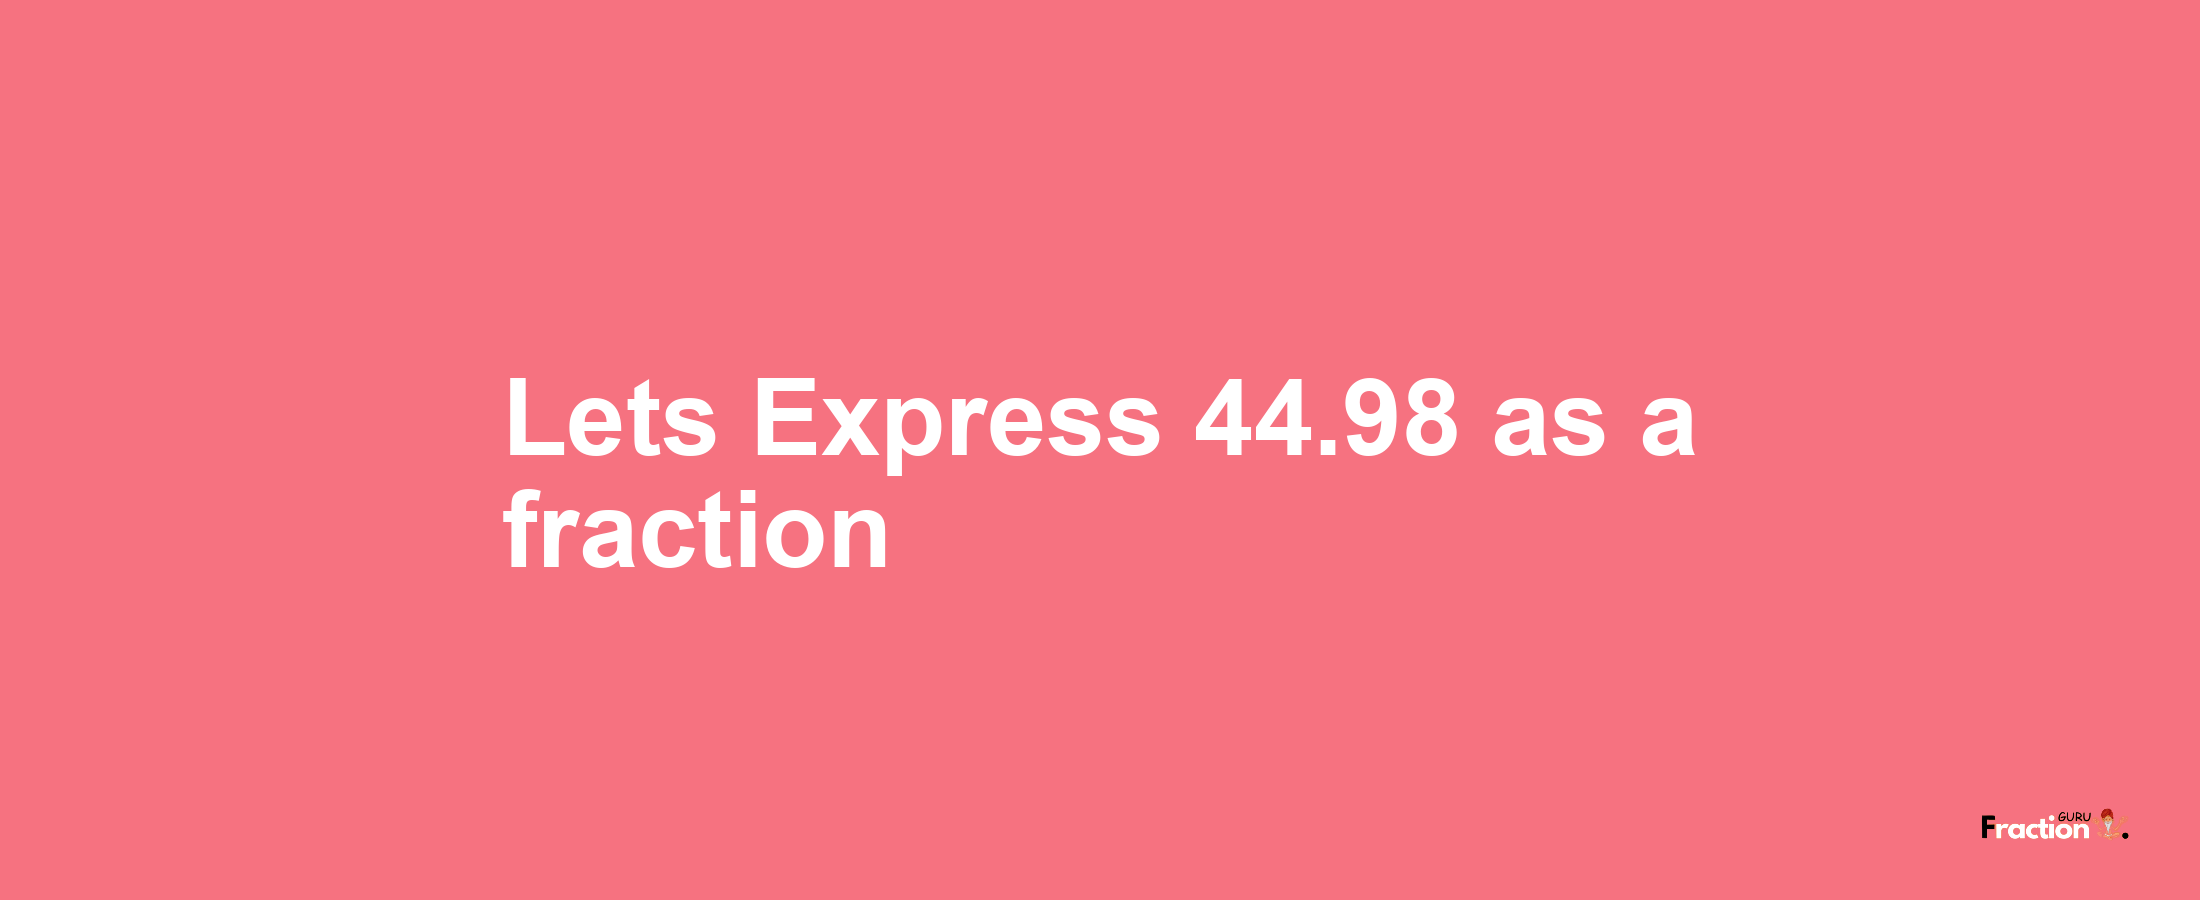 Lets Express 44.98 as afraction